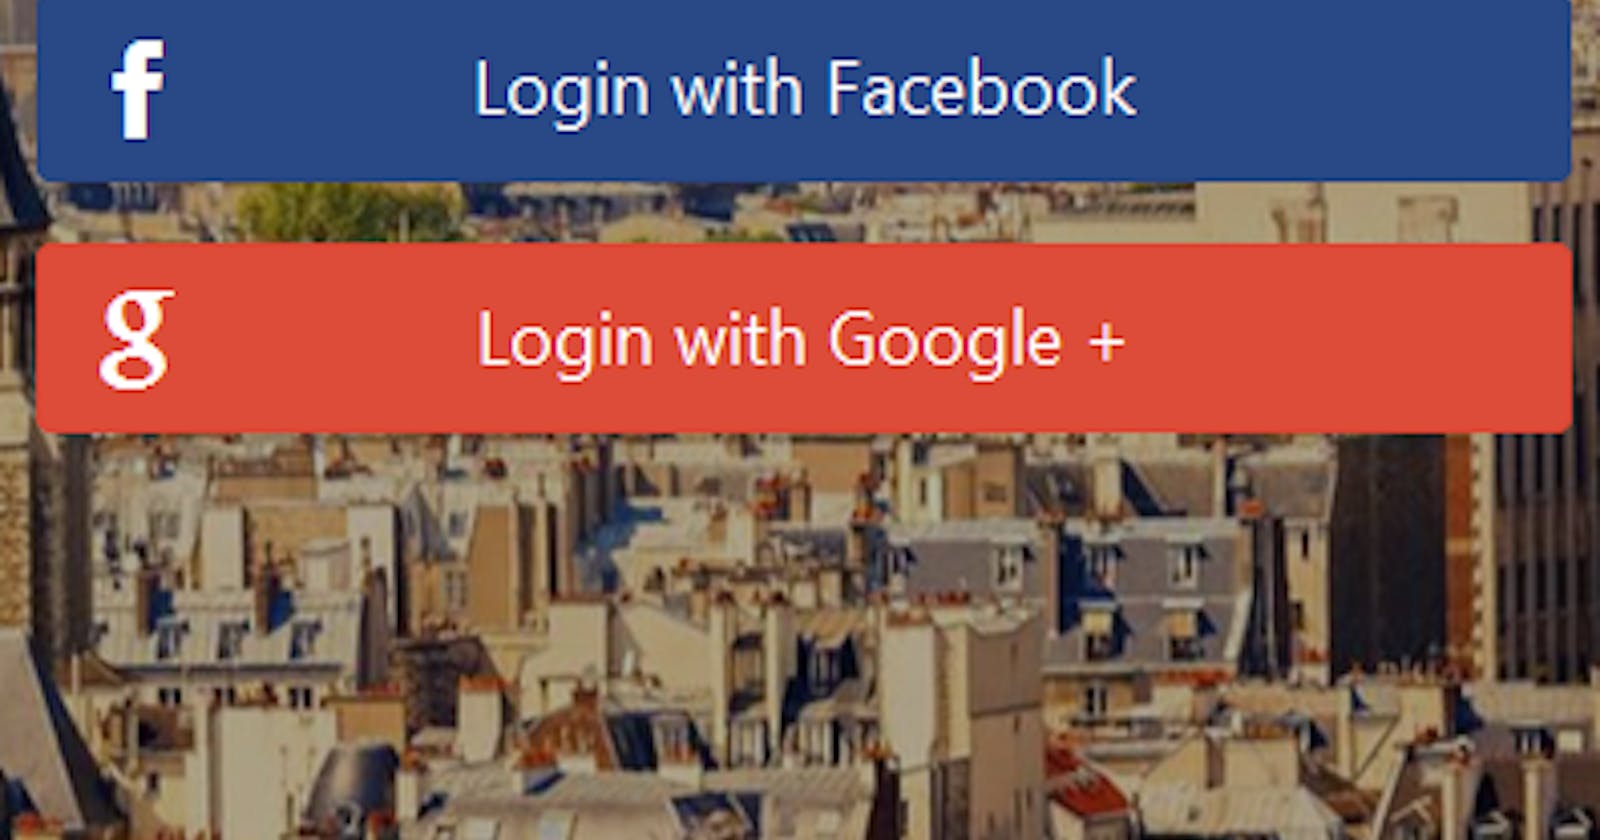 Ionic login page design with cool image effects - Coding Scripts